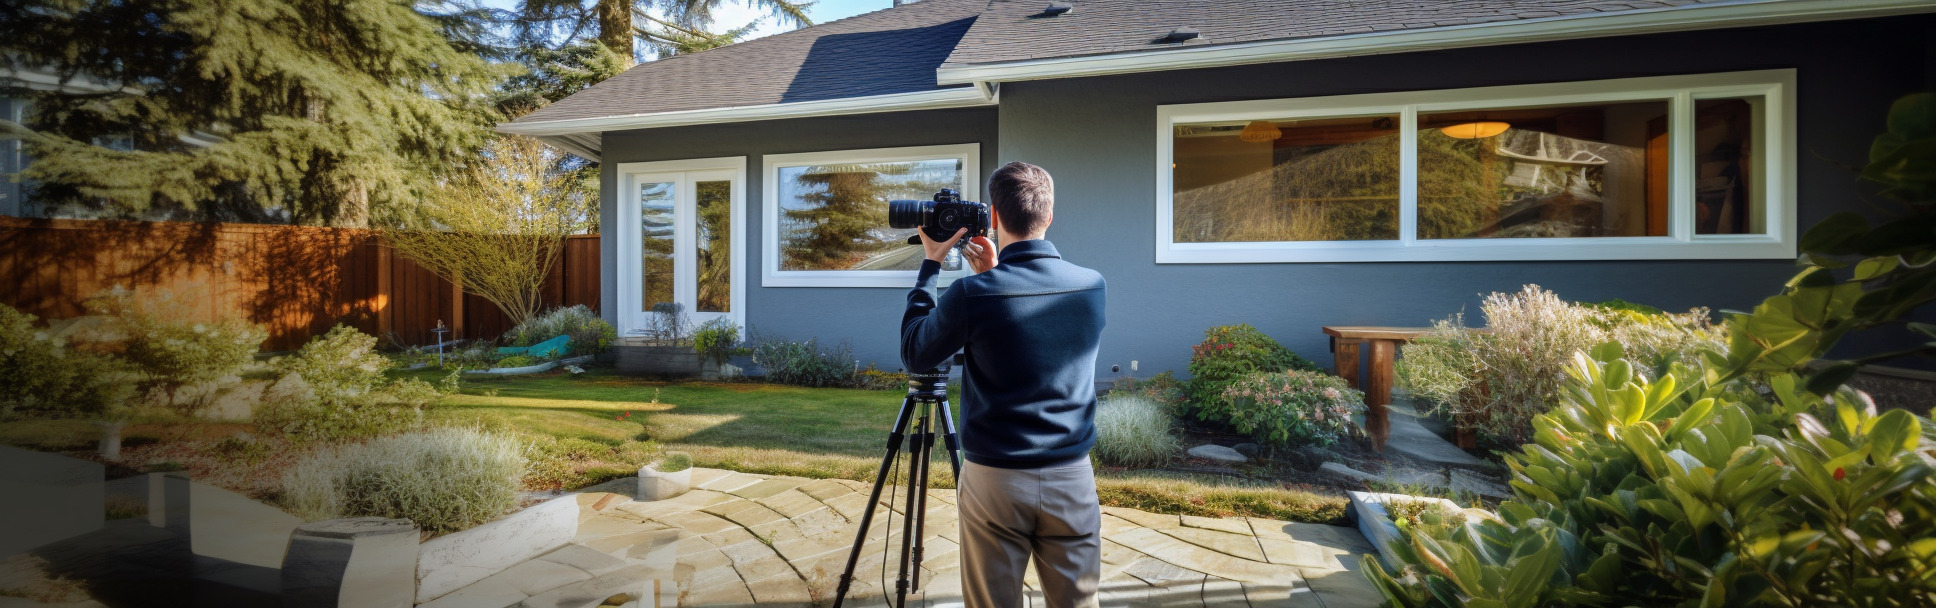 Real estate photography classes for realtors